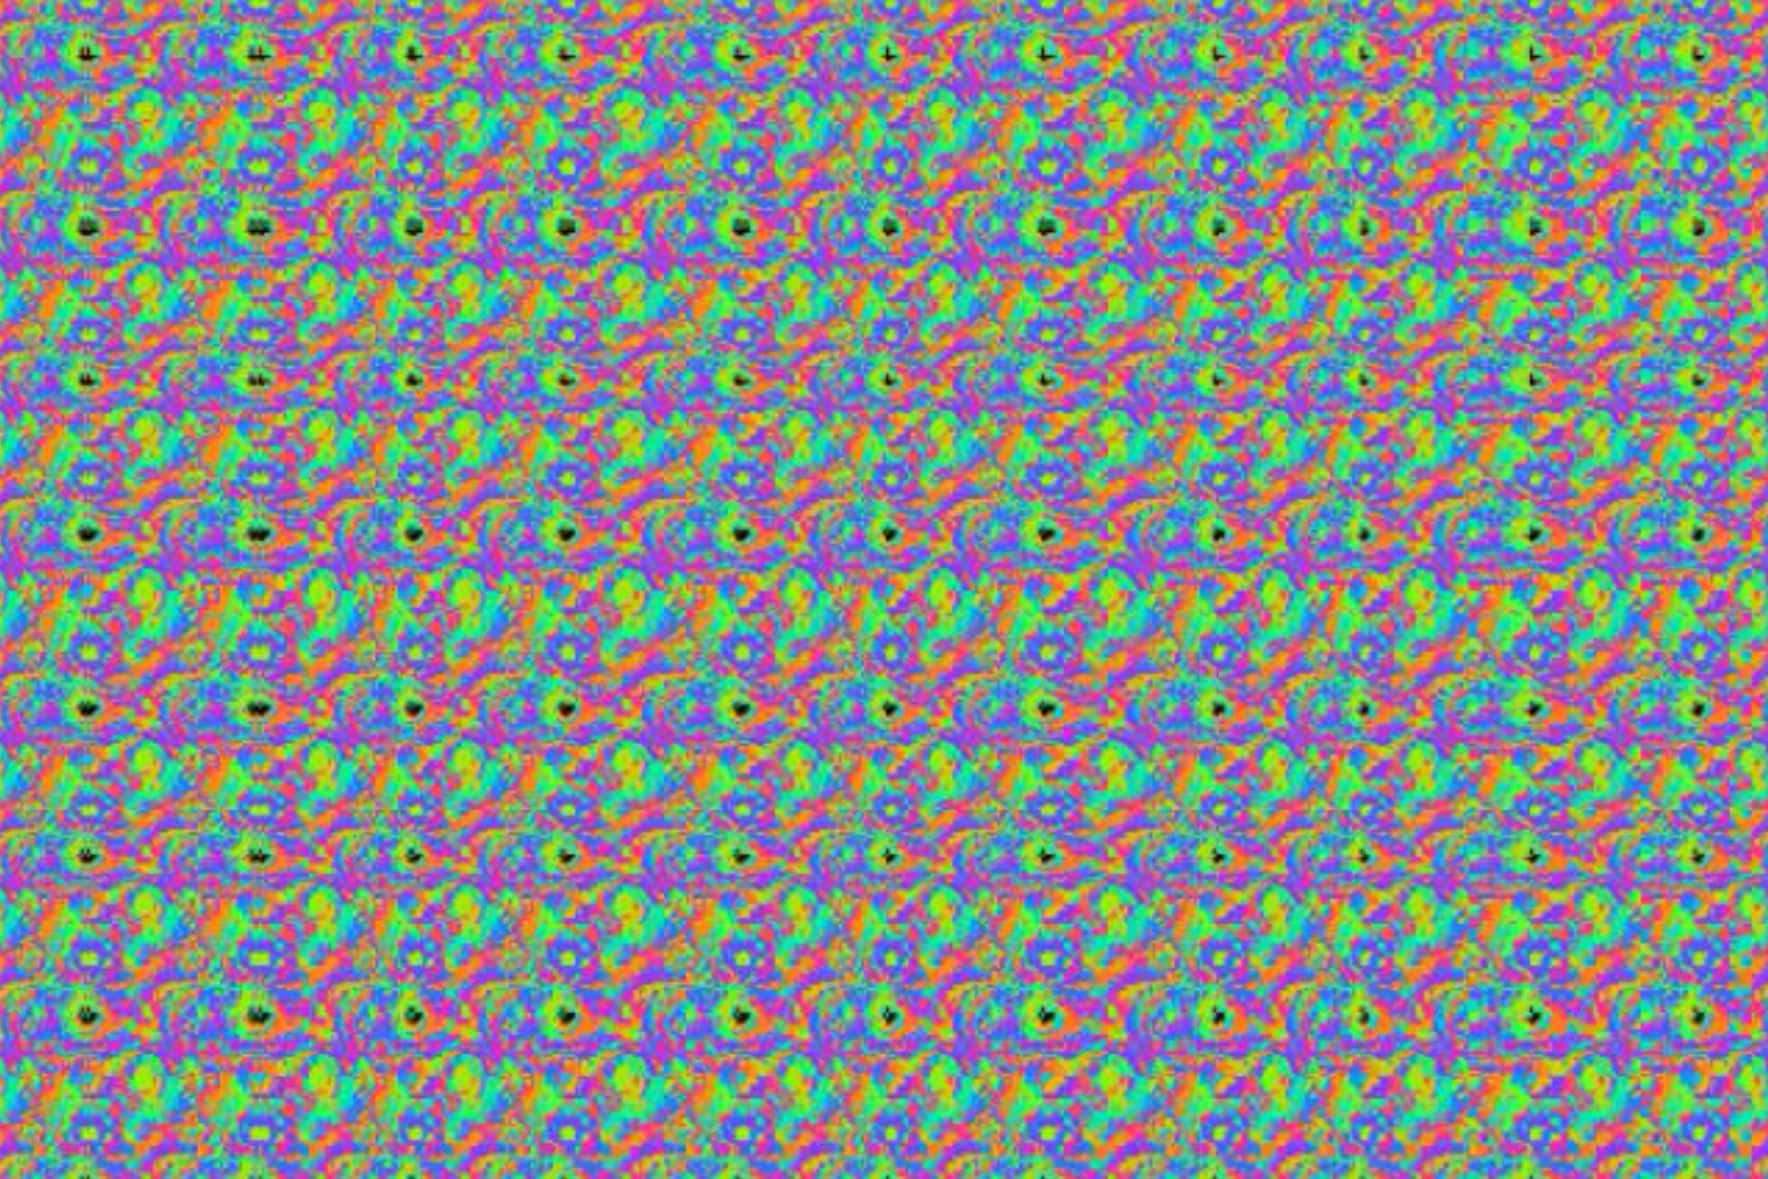 "Behold the Beauty of a Magic Eye Picture"